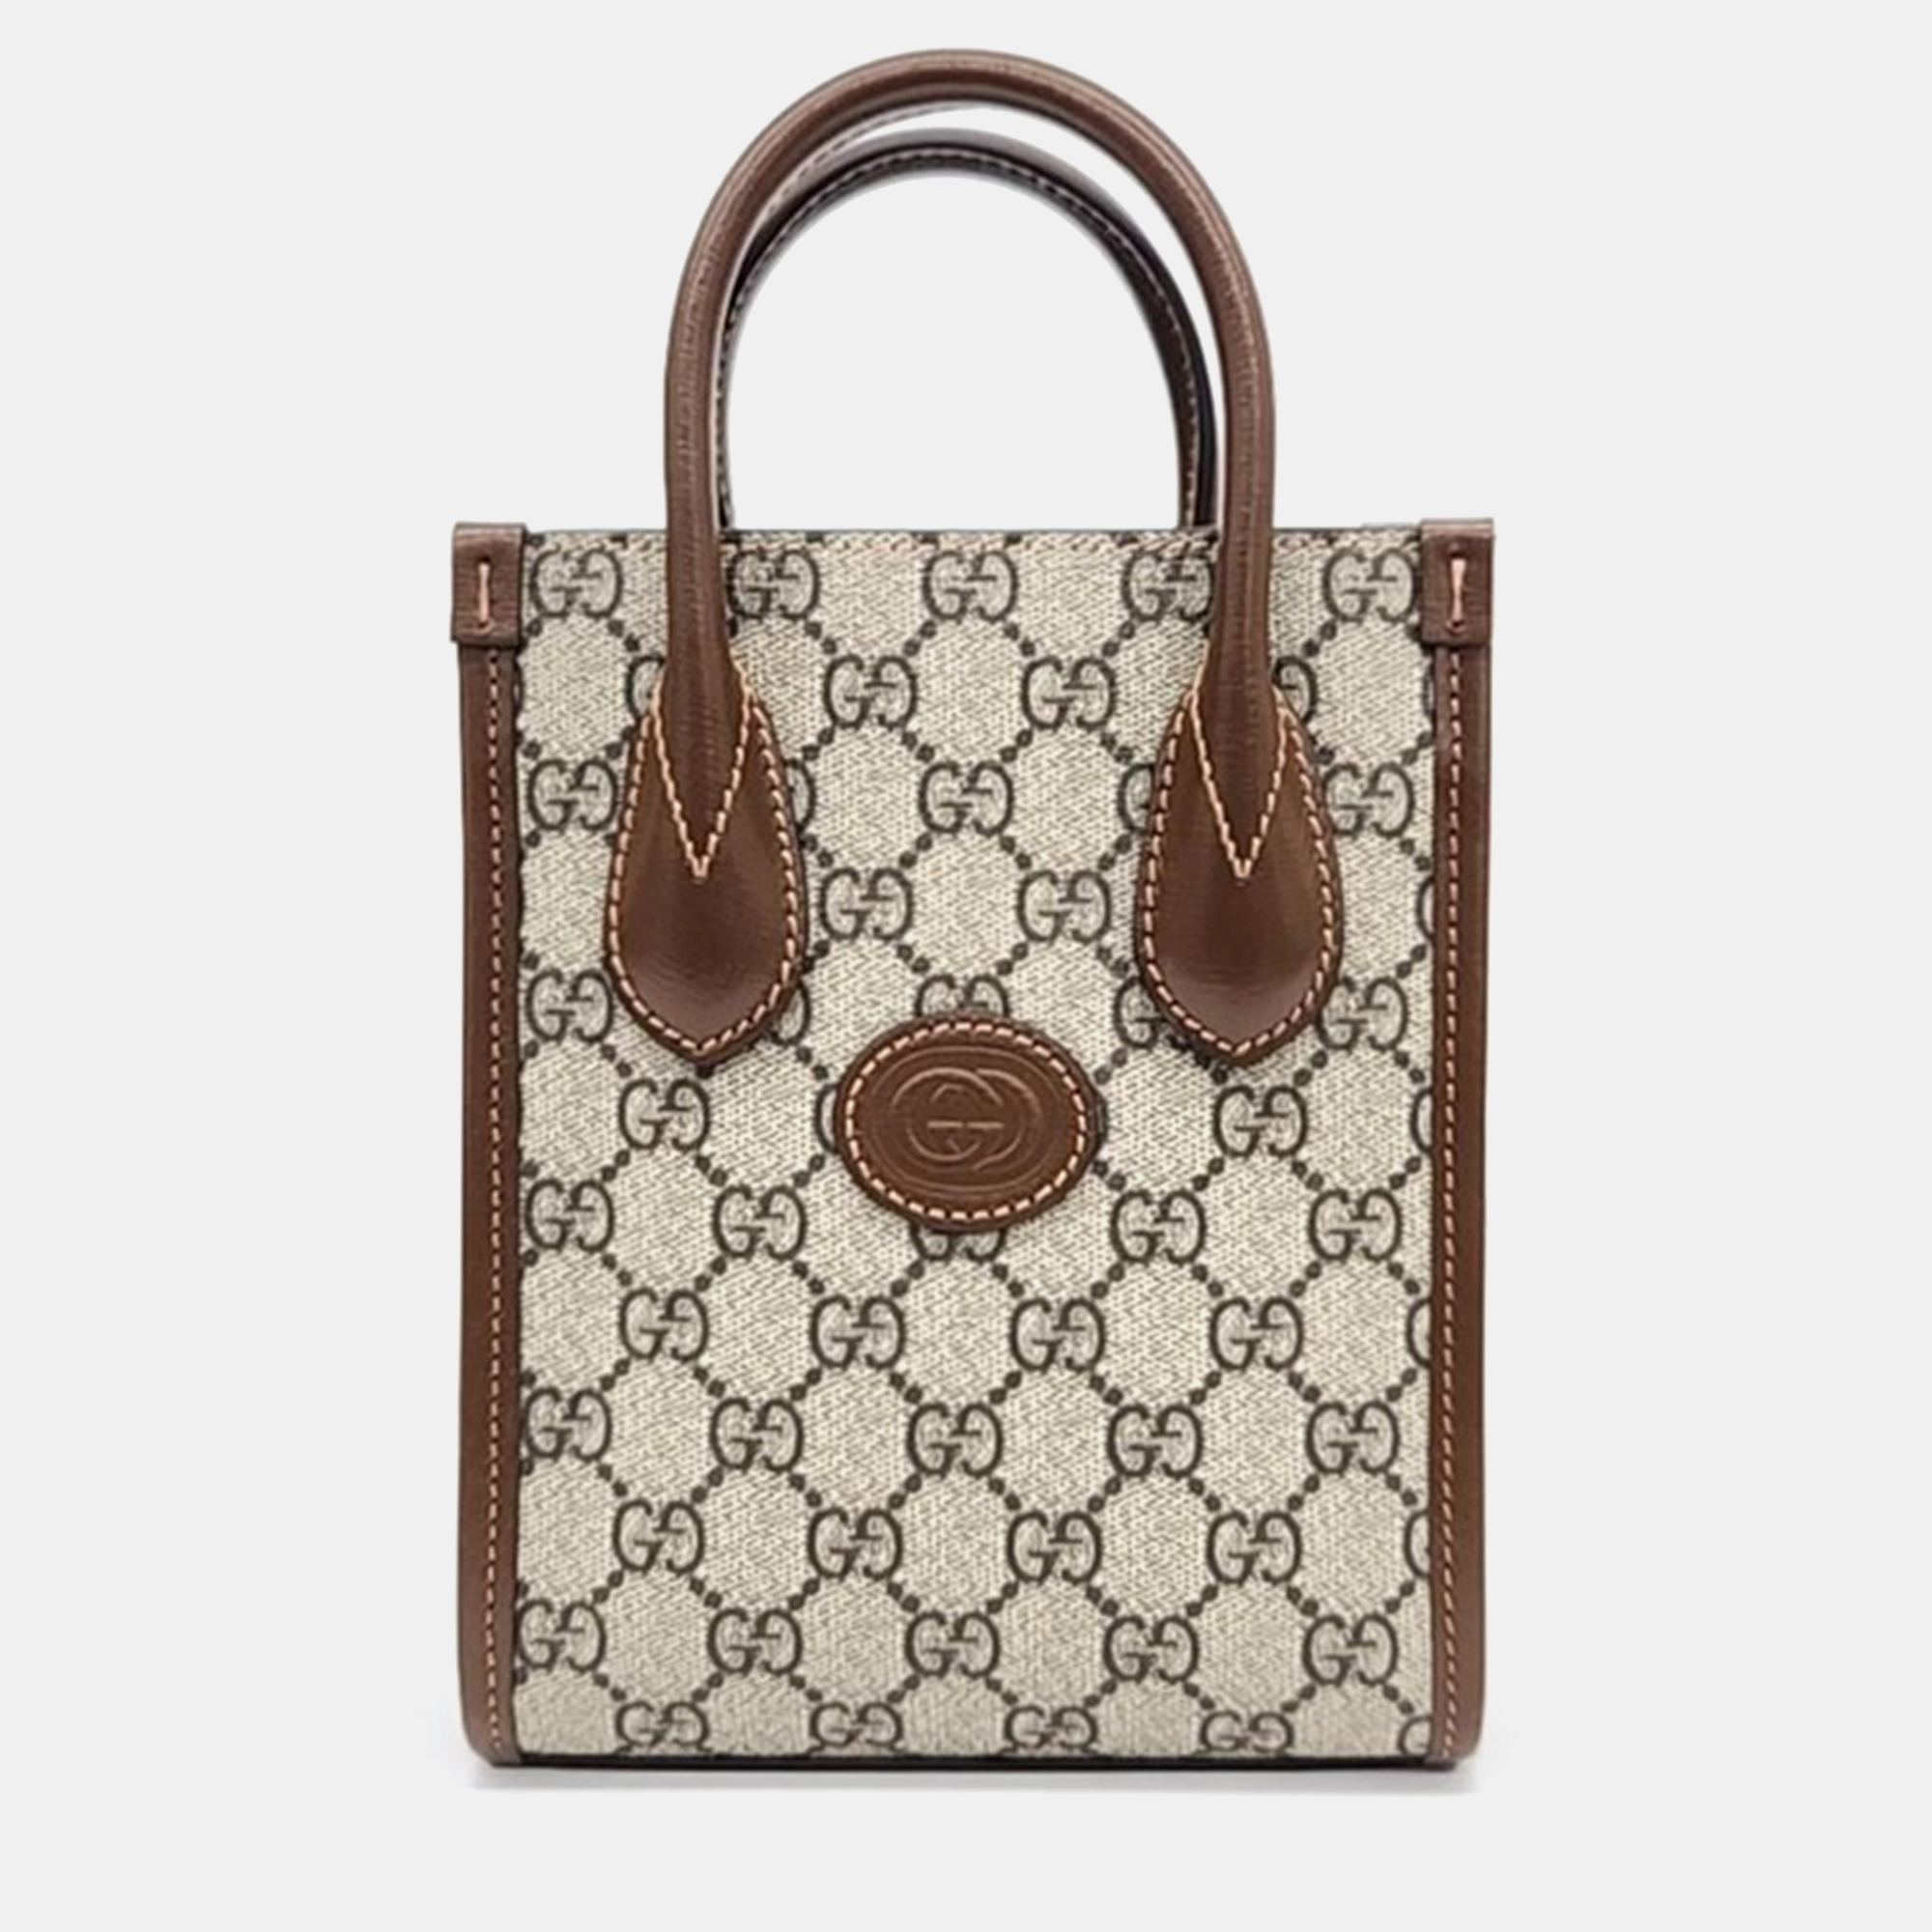 Crafted with precision this Gucci tote combines luxurious materials with impeccable design ensuring you make a sophisticated statement wherever you go. Invest in it today.